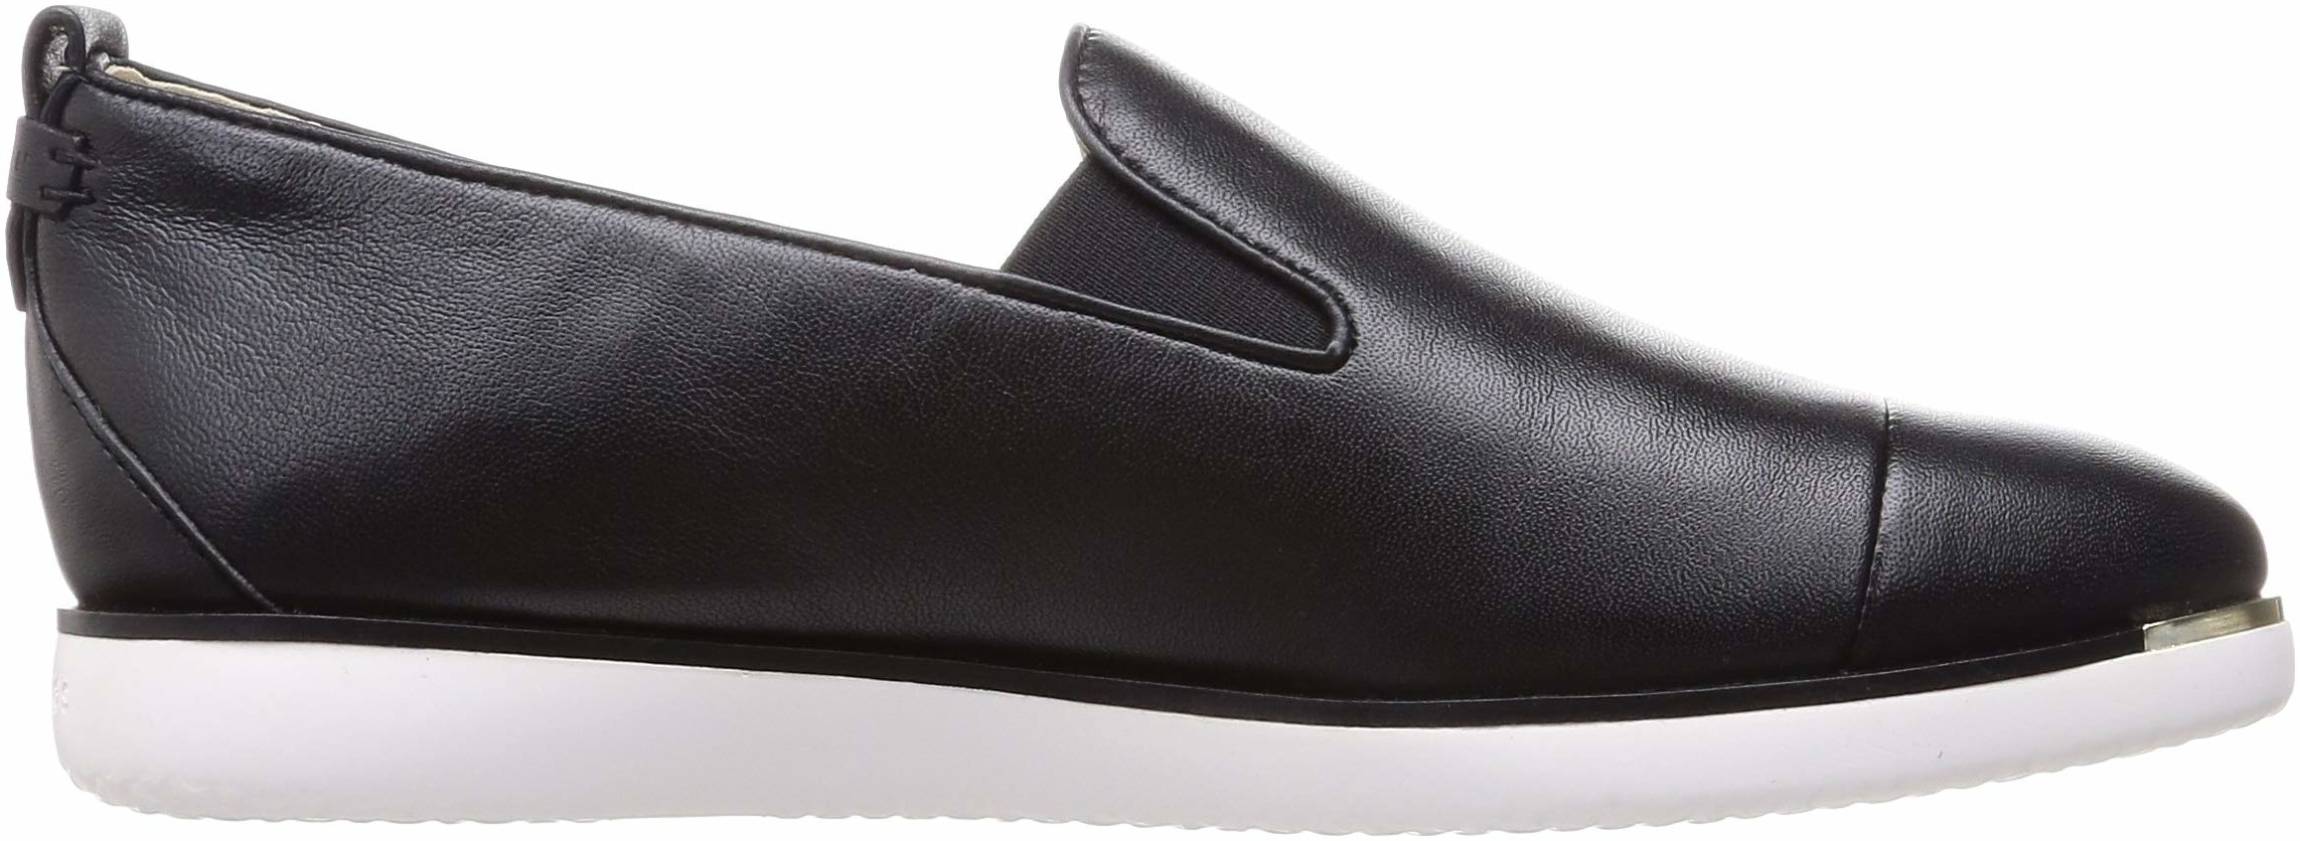 Cole Haan Grand Ambition sneakers in black (only $80) | RunRepeat